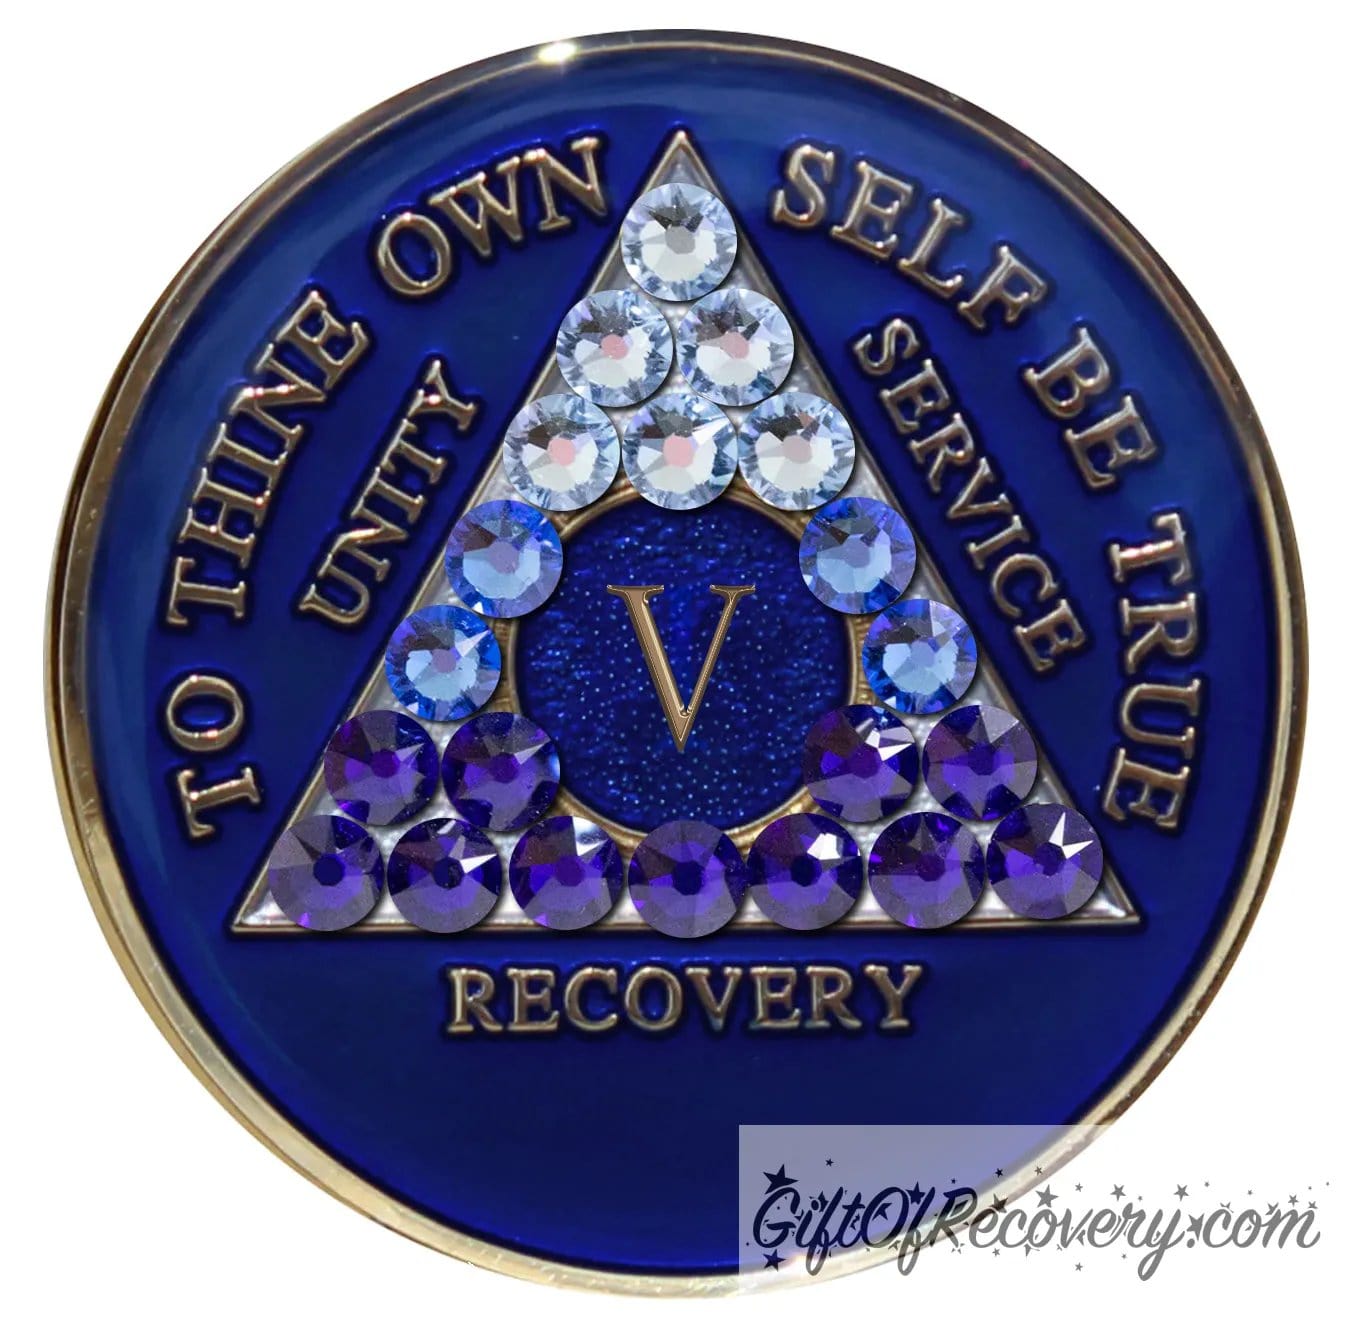 5 year Big Book Blue AA medallion with 21 genuine crystals forming the triangle, going from light to dark blue to represent transitions in your recovery journey, the center circle is blue sparkle, with the roman numeral, AA moto and rim in 14k gold plated brass and resin sealed for a glossy finish.